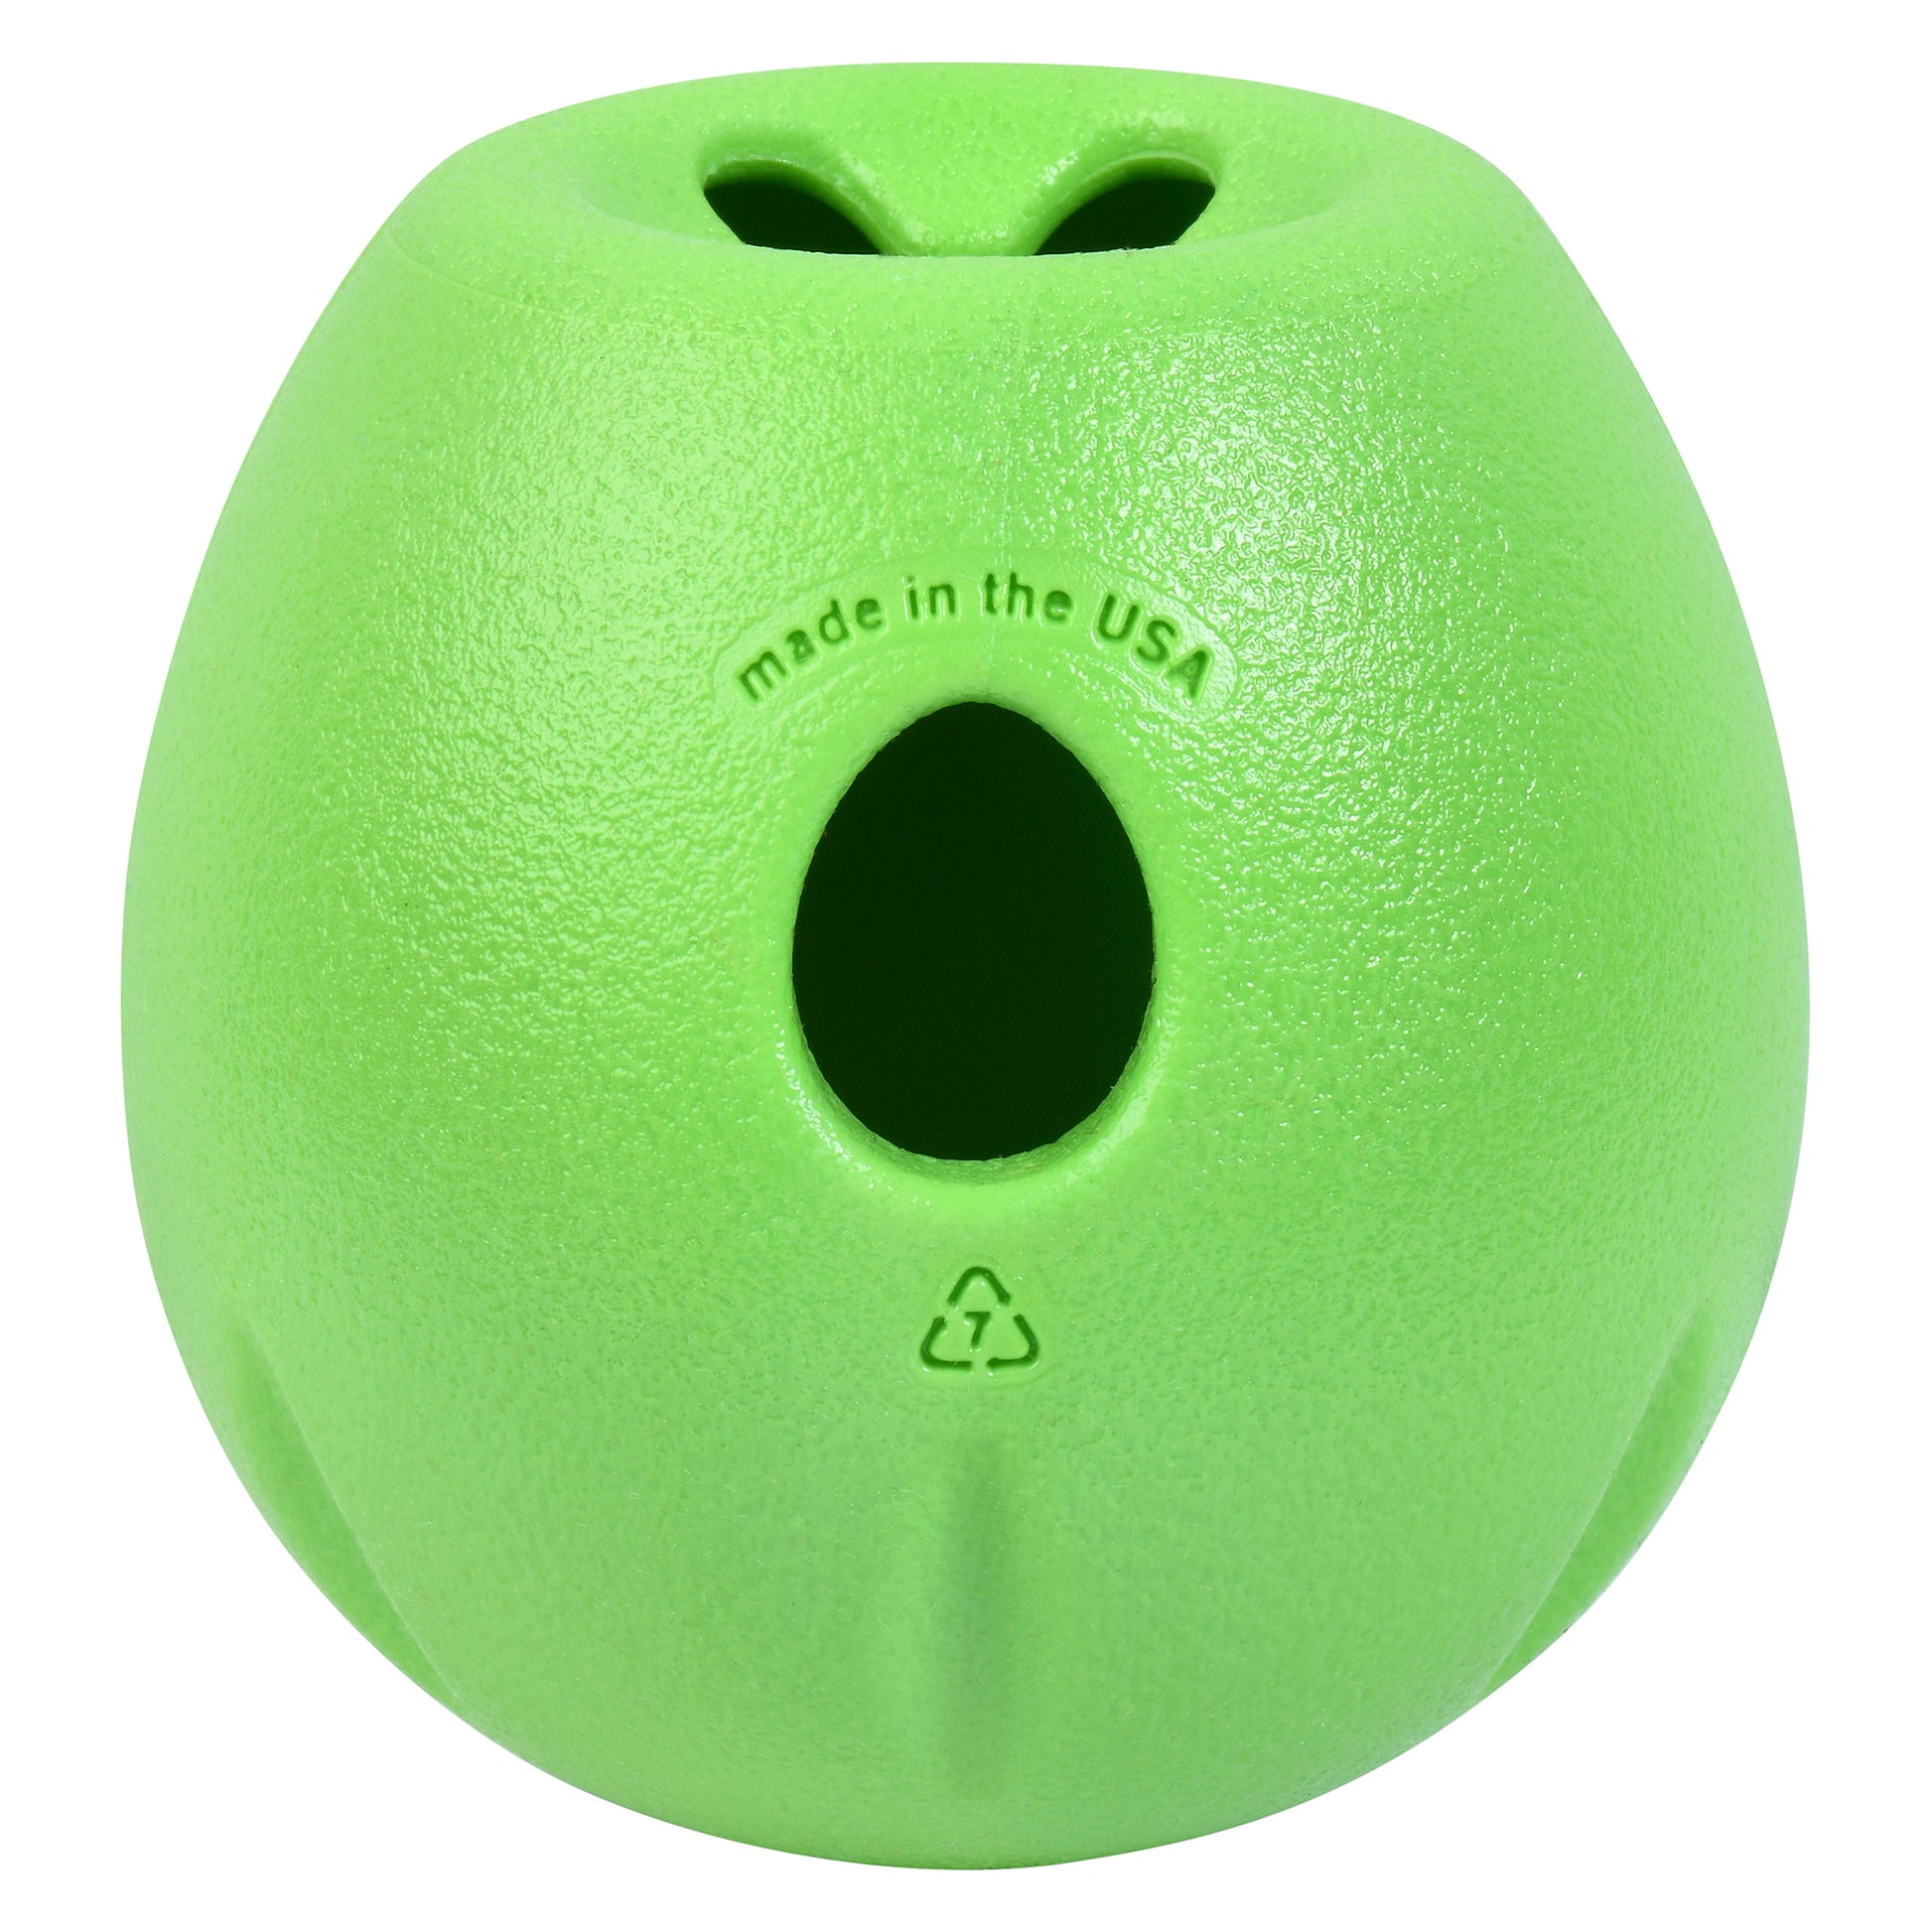 Green West Paw Rumbl dog toy